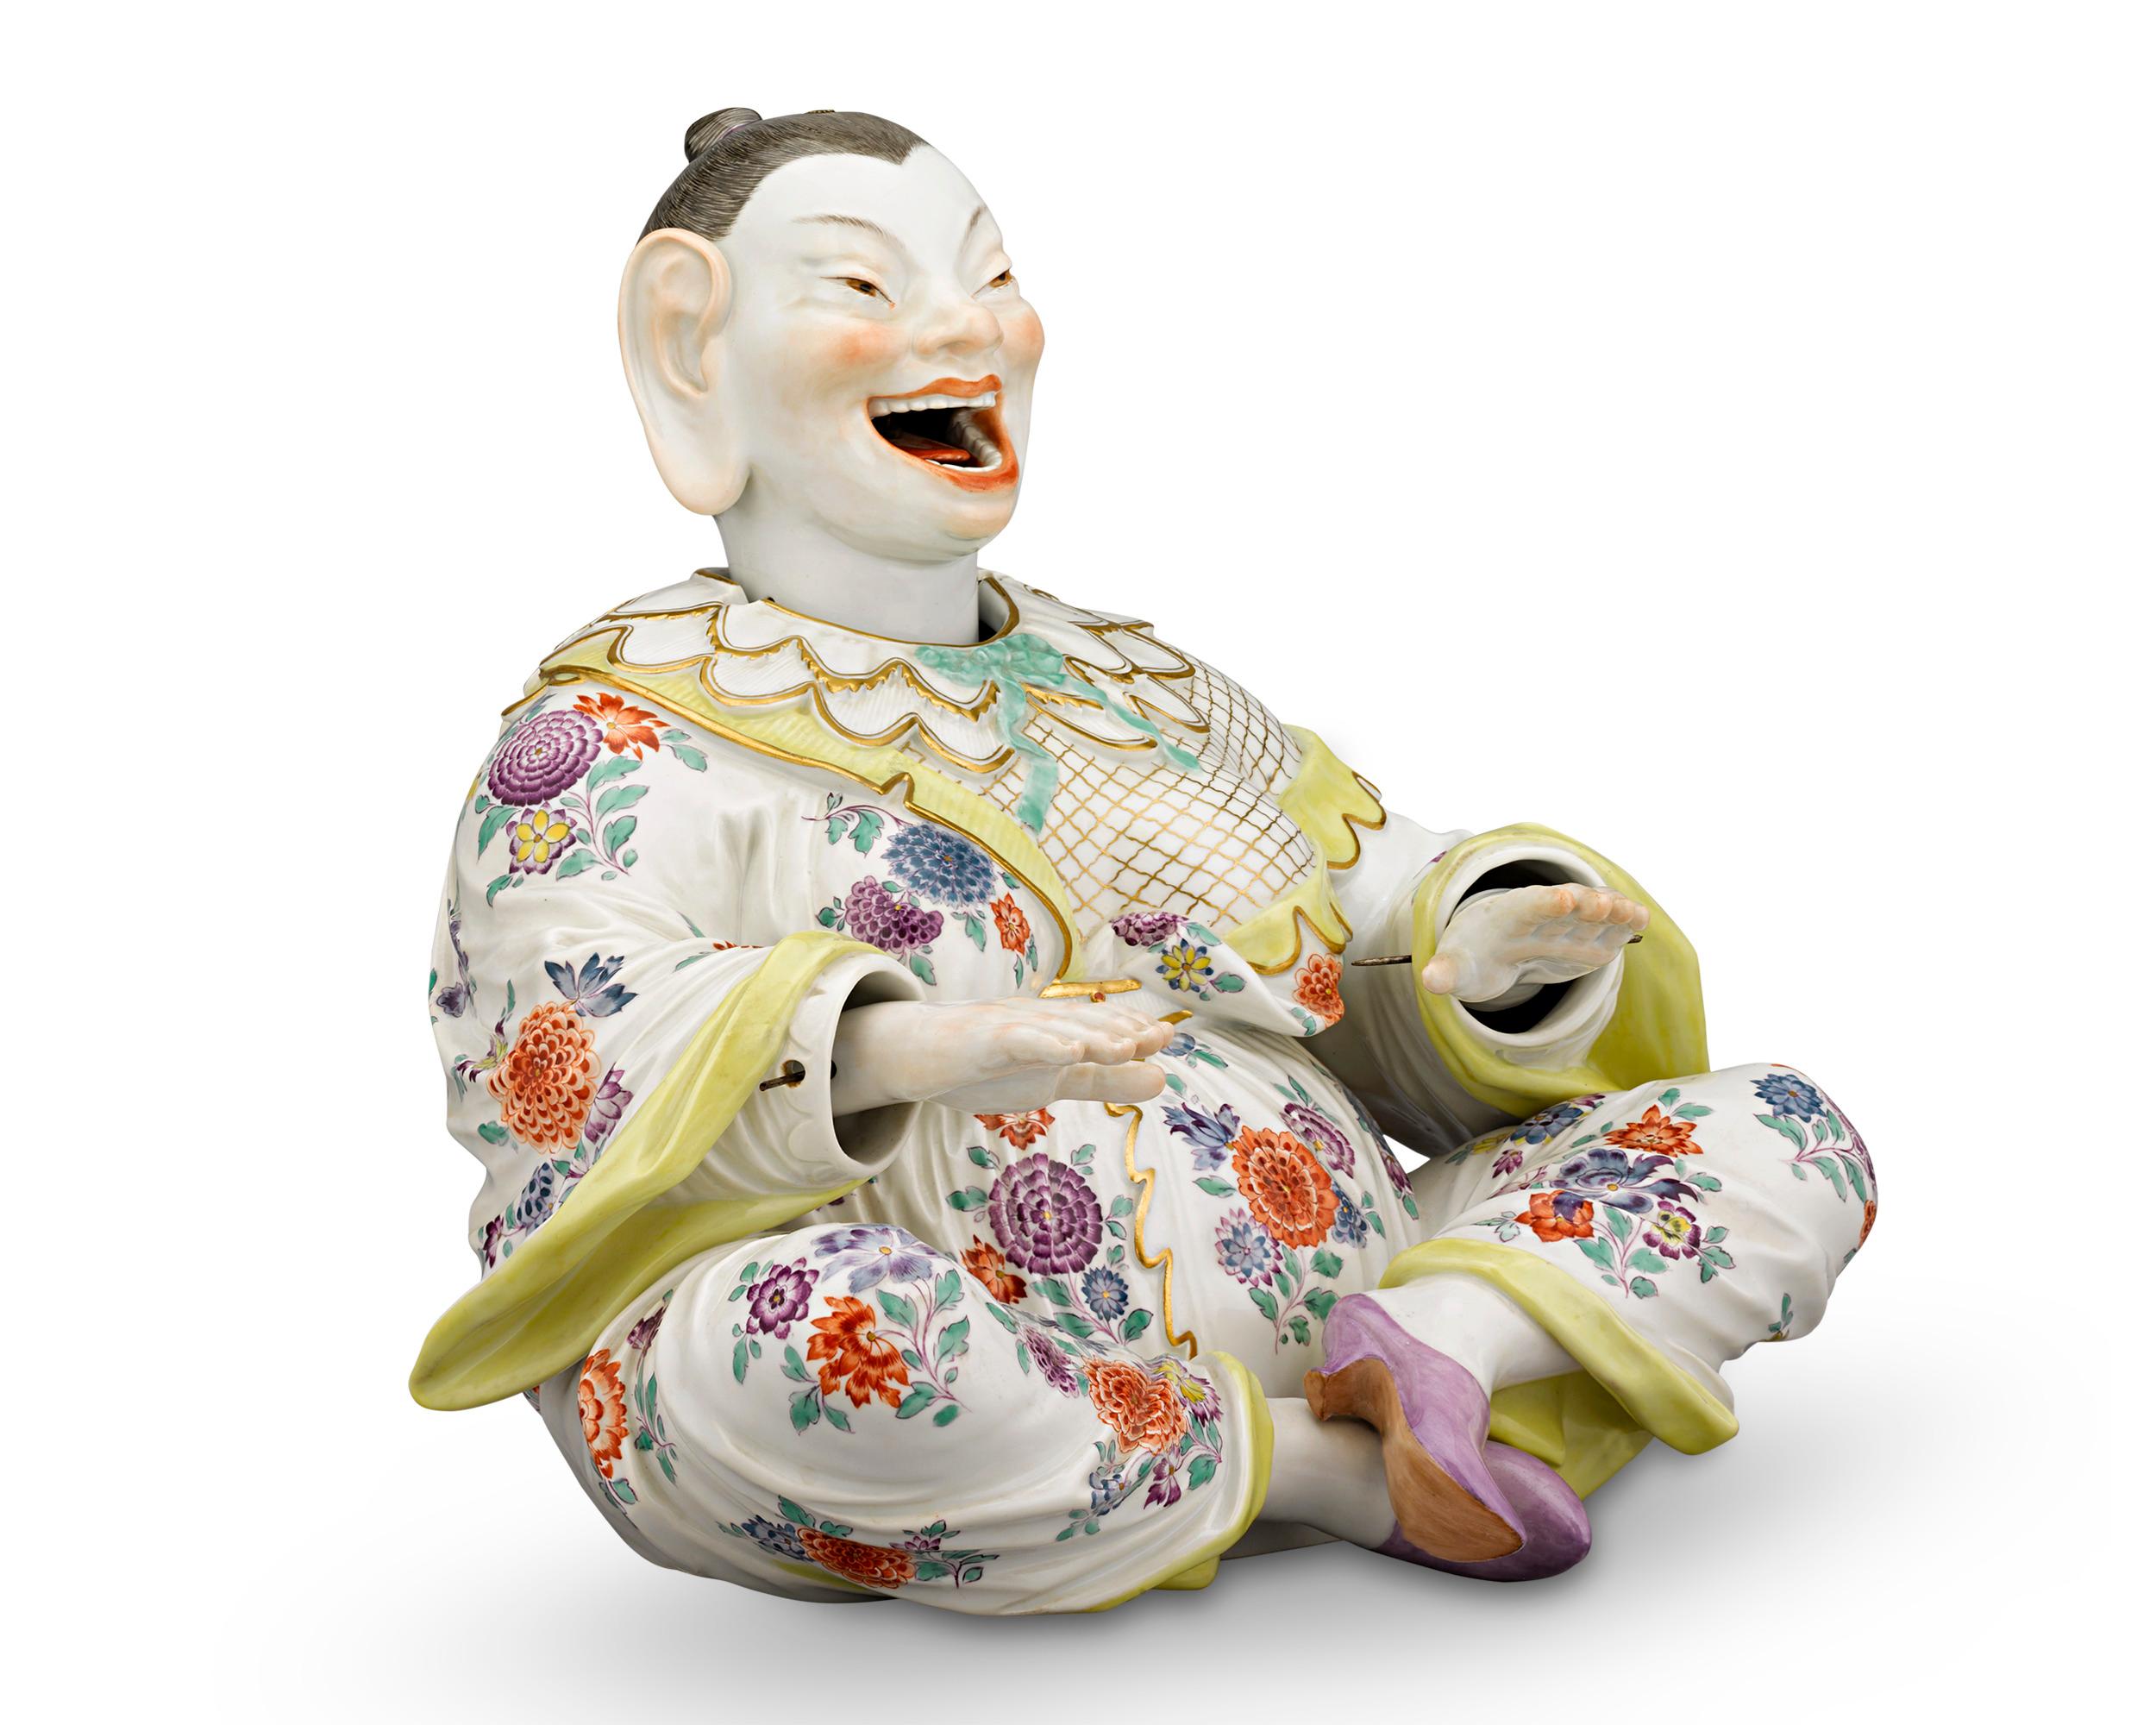 Crafted by the legendary Meissen, this charming porcelain nodder takes the form of an Asian woman in vividly hued garments. The perfectly balanced design includes hidden springs on the interior that set the figurine into motion with the slightest